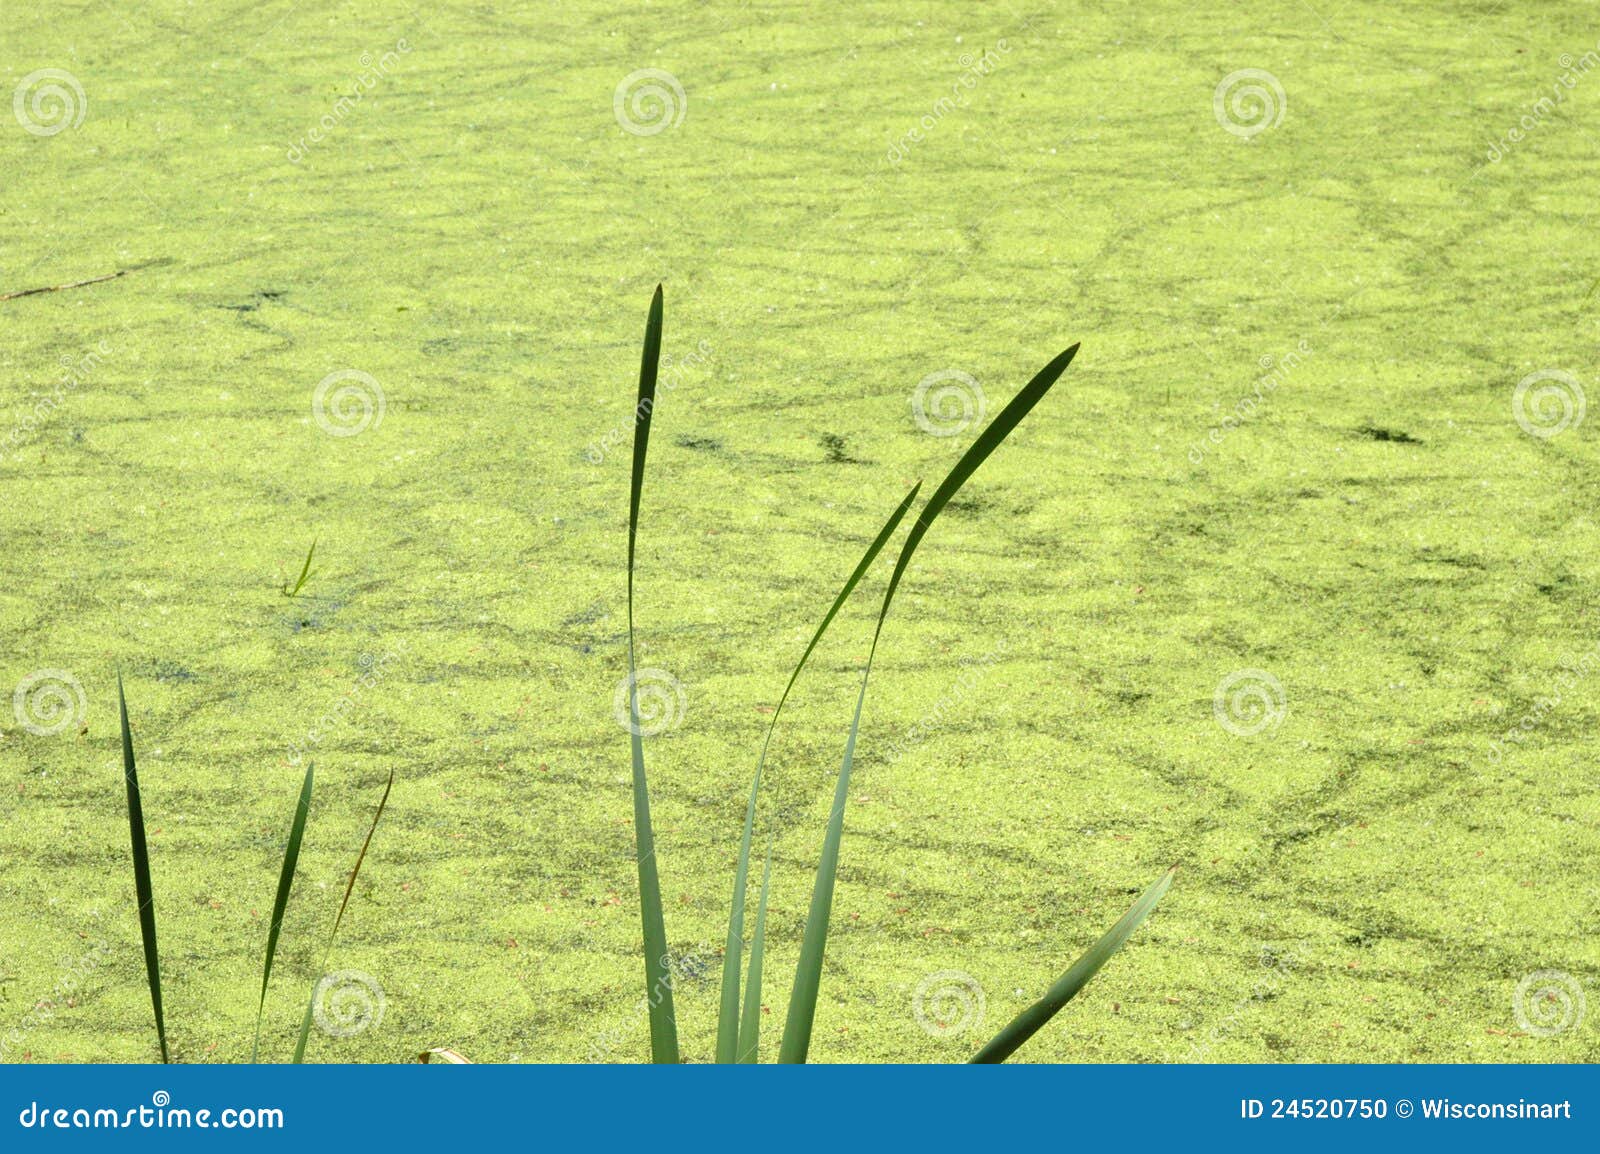 abstract nature background pond swamp water, algae